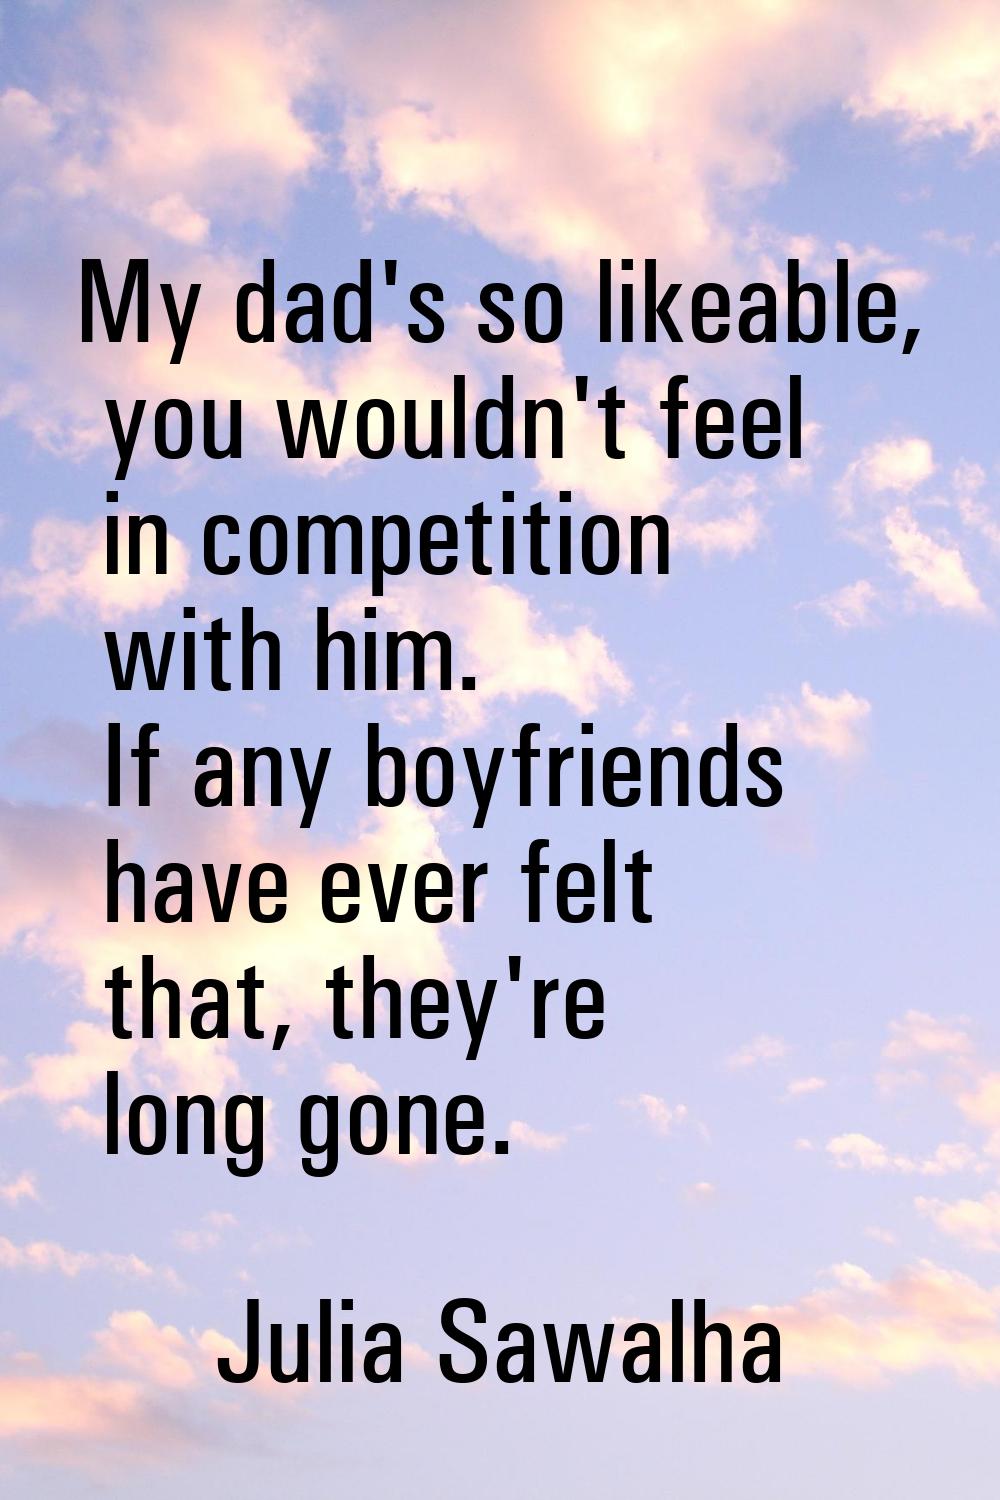 My dad's so likeable, you wouldn't feel in competition with him. If any boyfriends have ever felt t